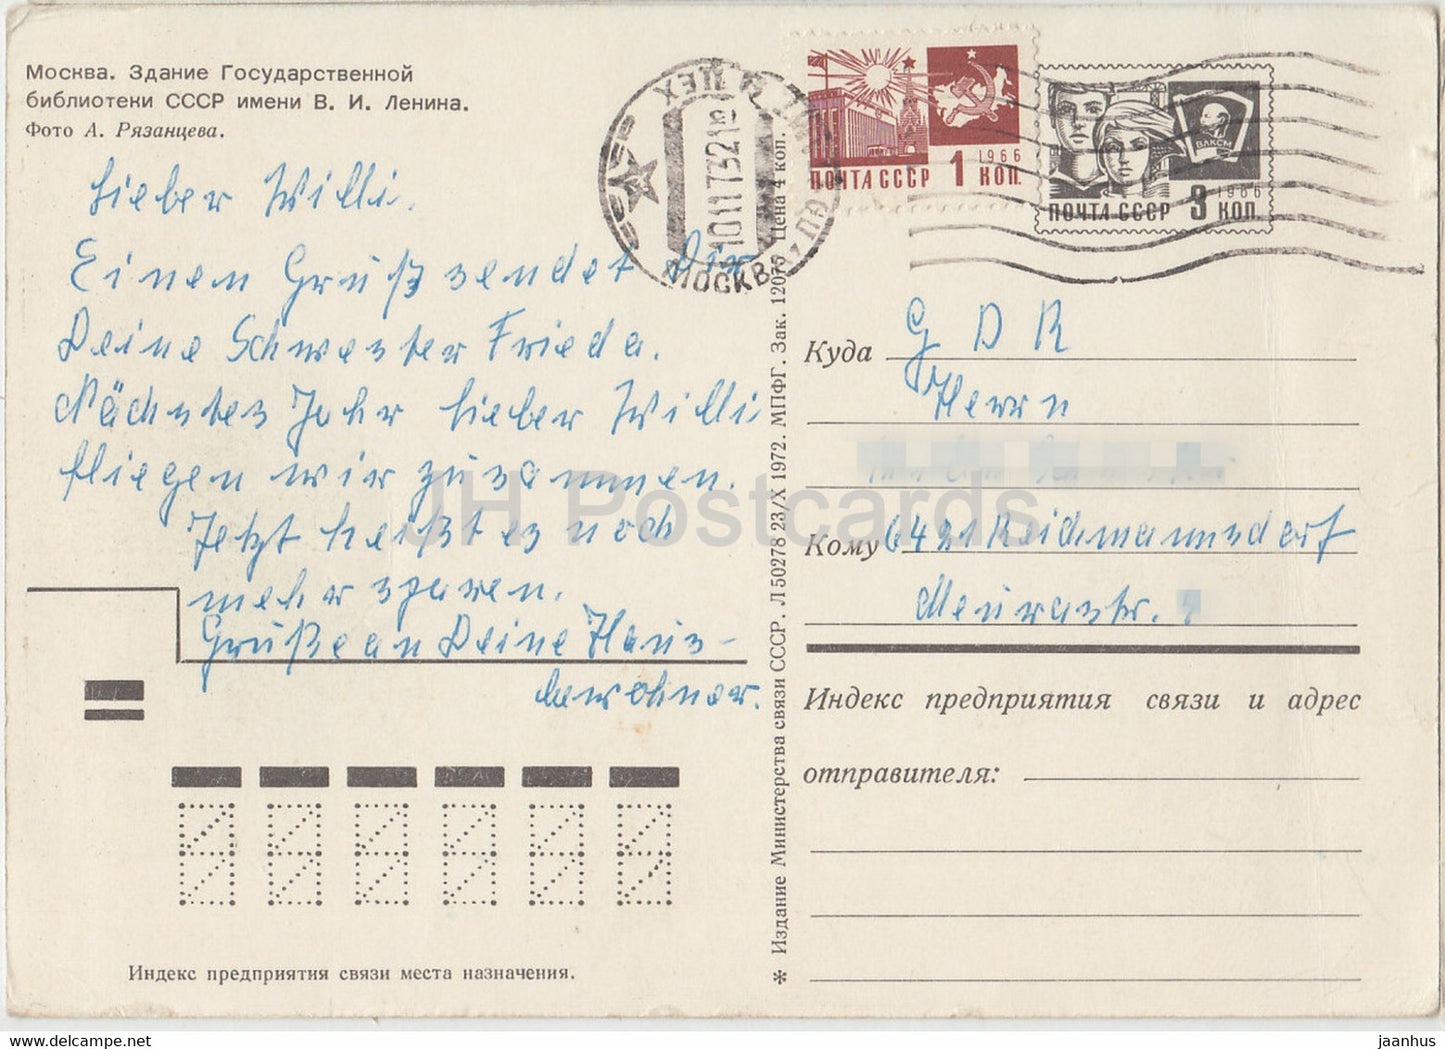 Moscow - Lenin State Library - postal stationery - 1972 - Russia USSR - used